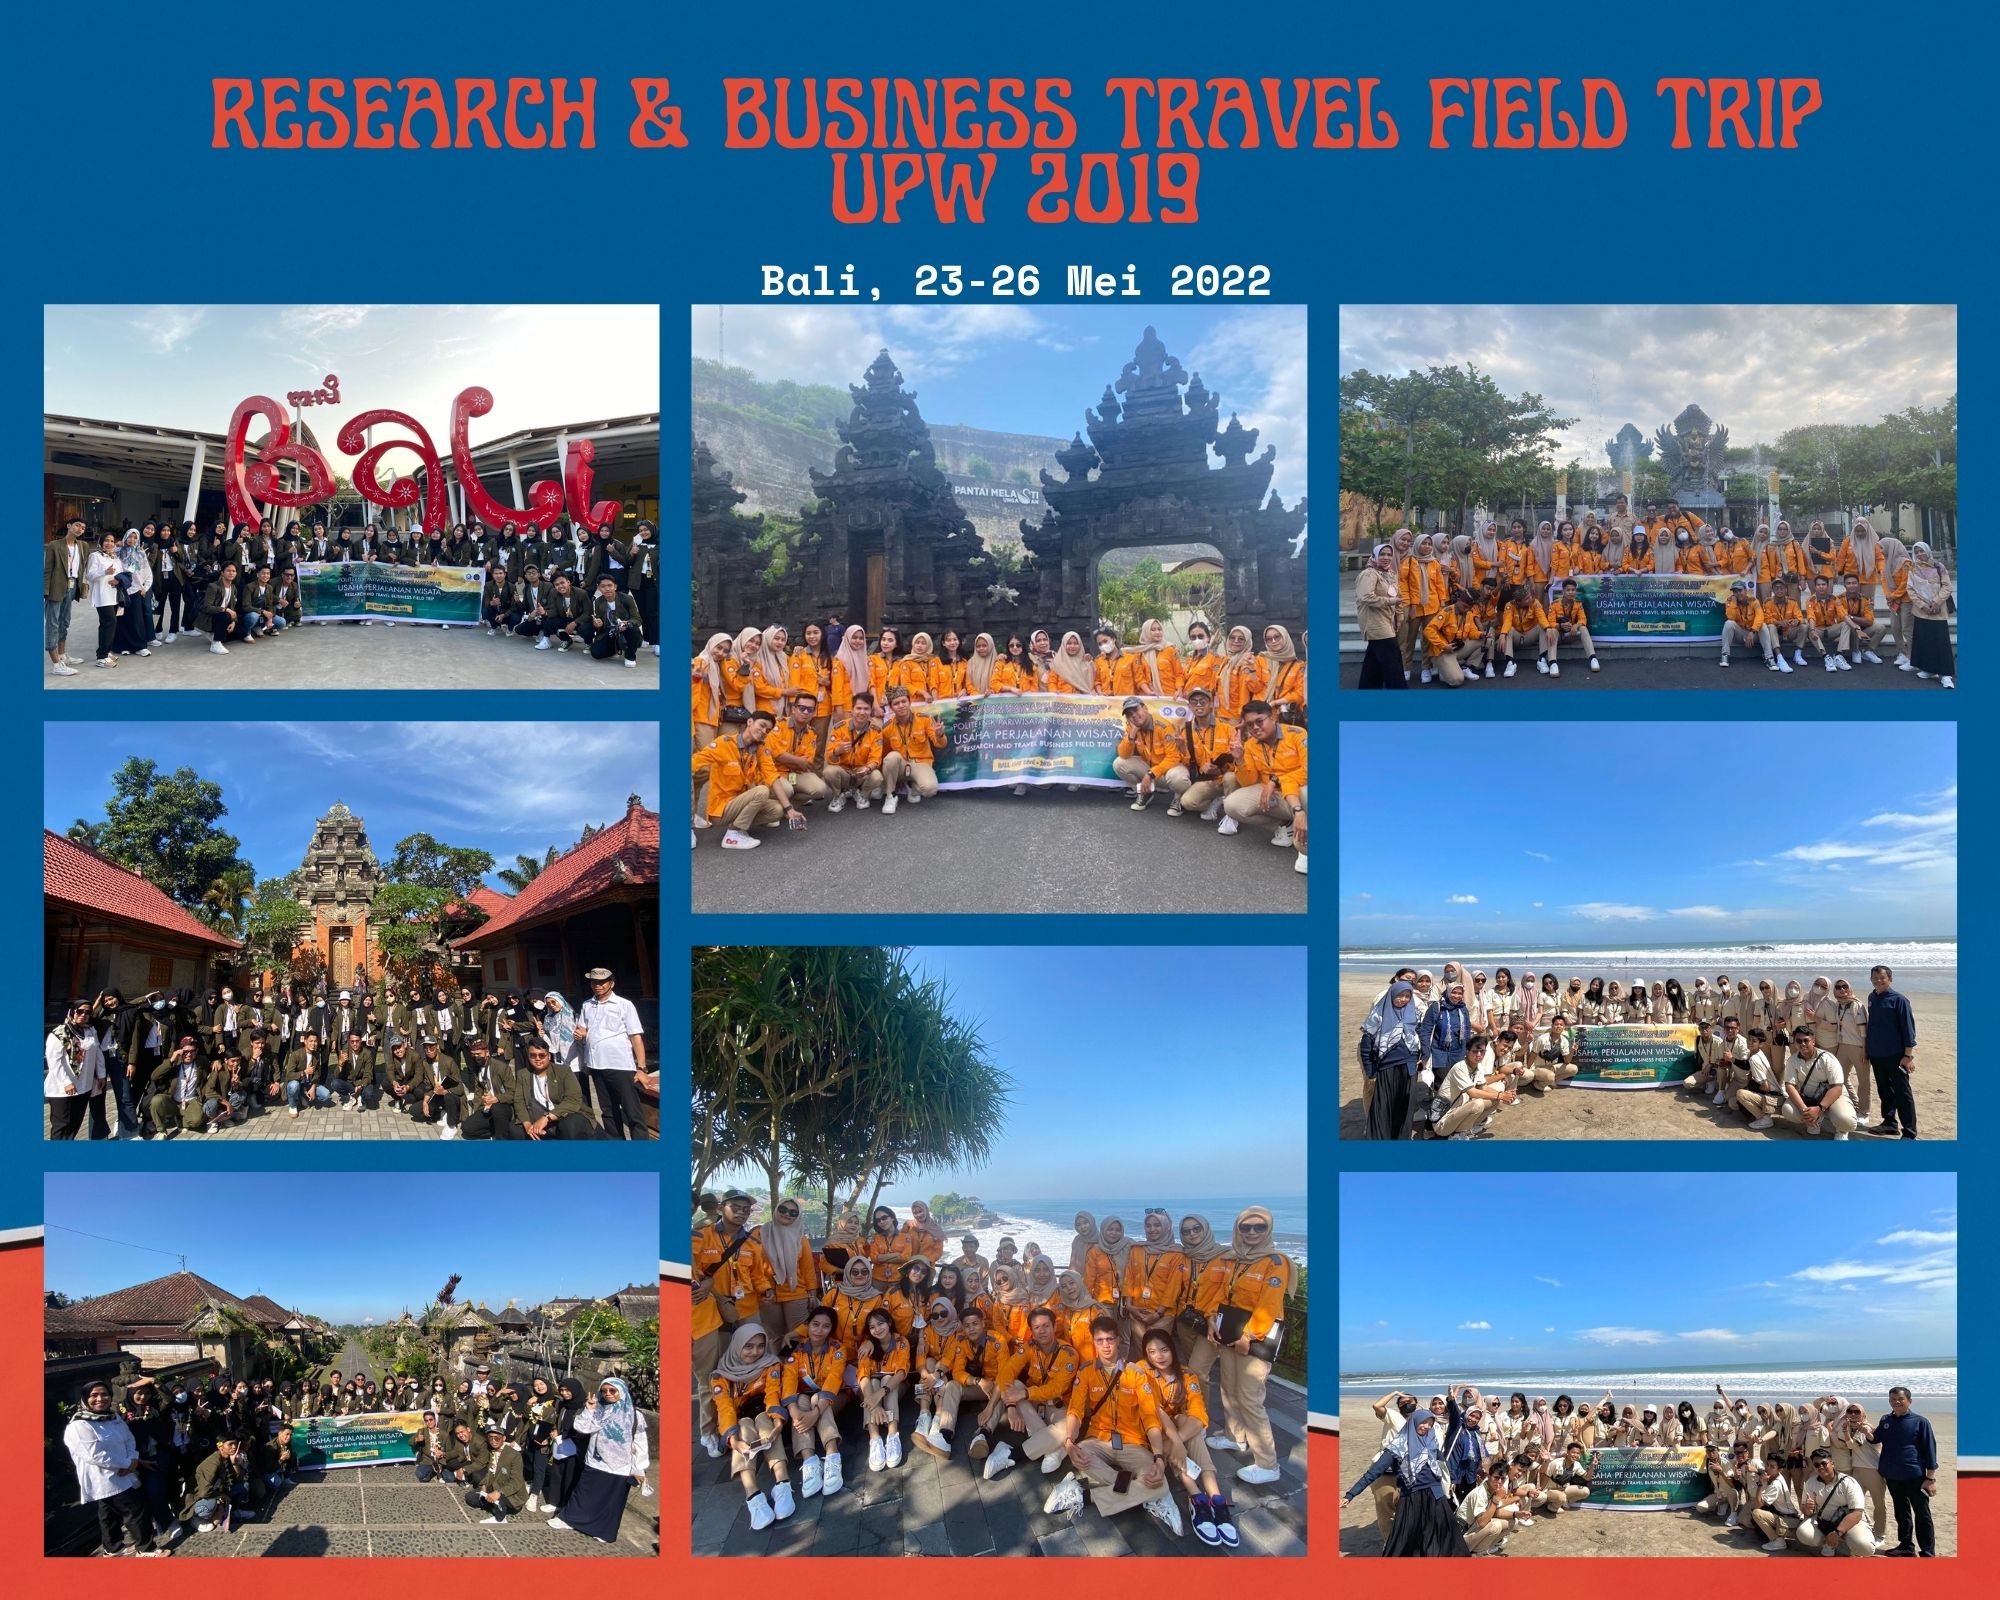 Research & Travel Business Field Trip UPW 2019